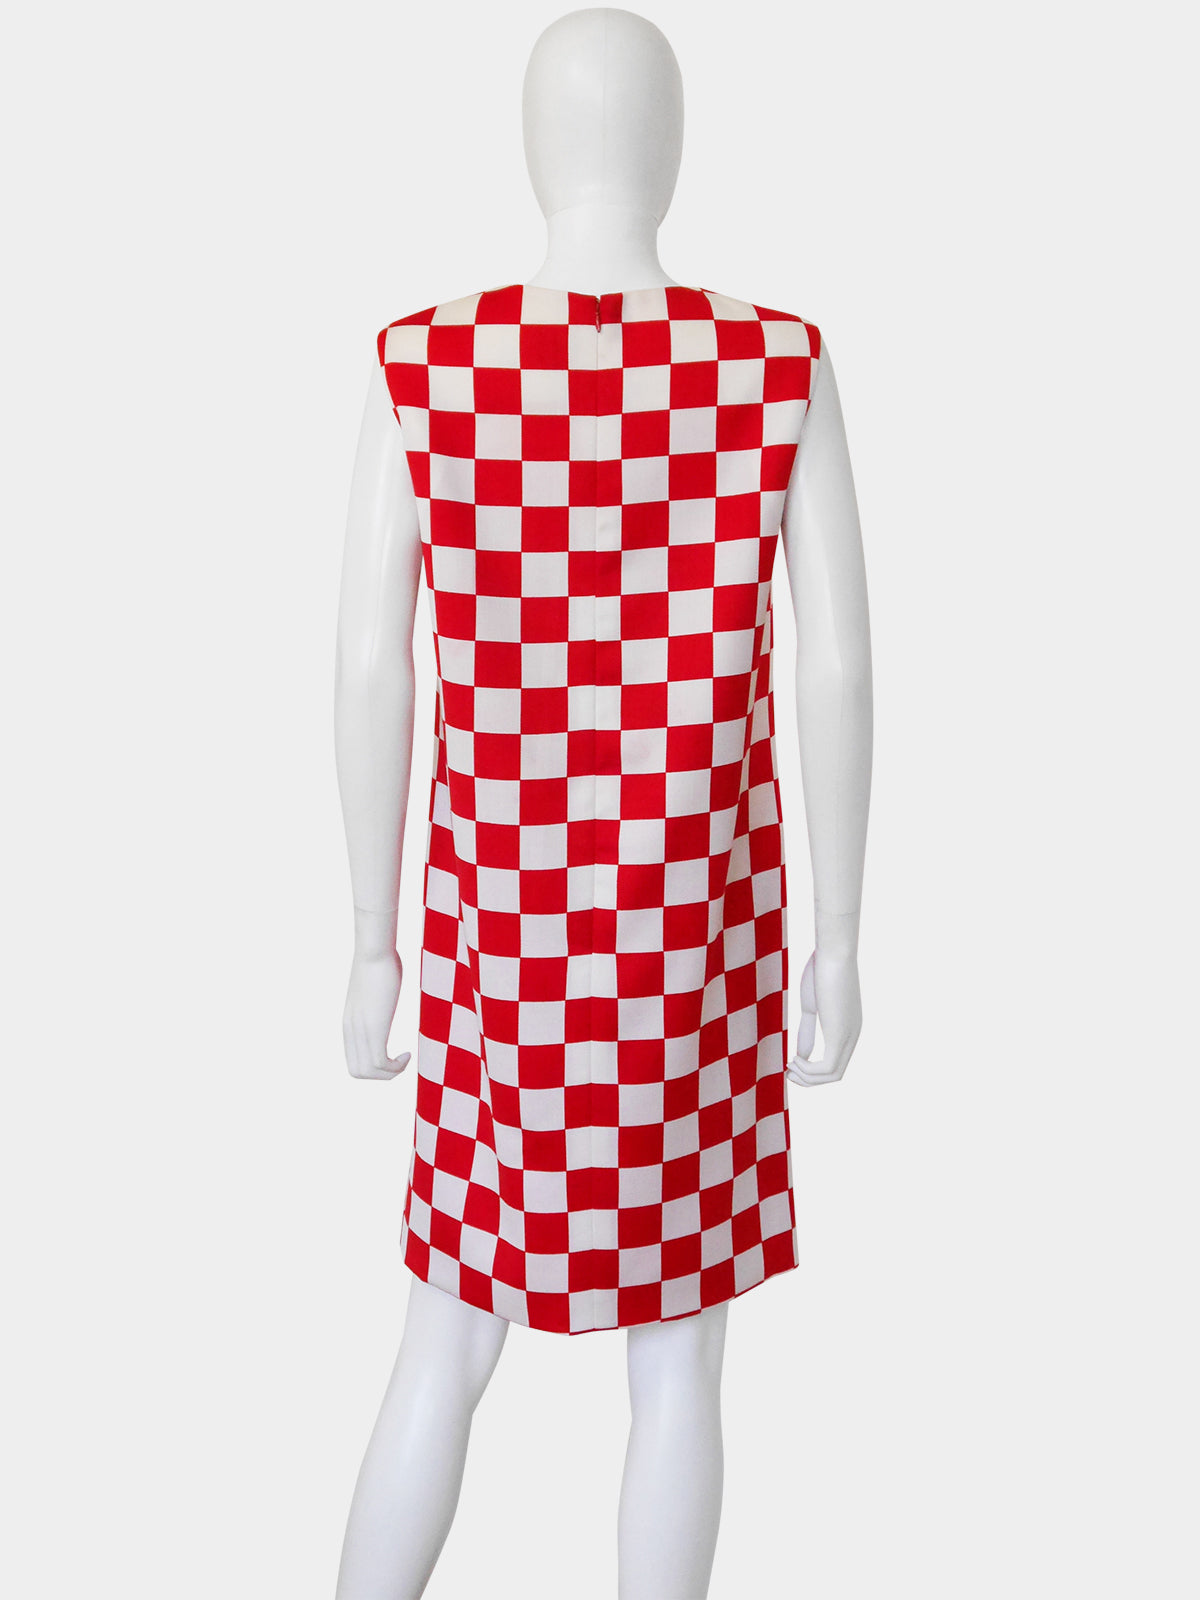 GIANNI VERSACE Couture Fall 1995 Vintage Checkered Shift Dress Size S